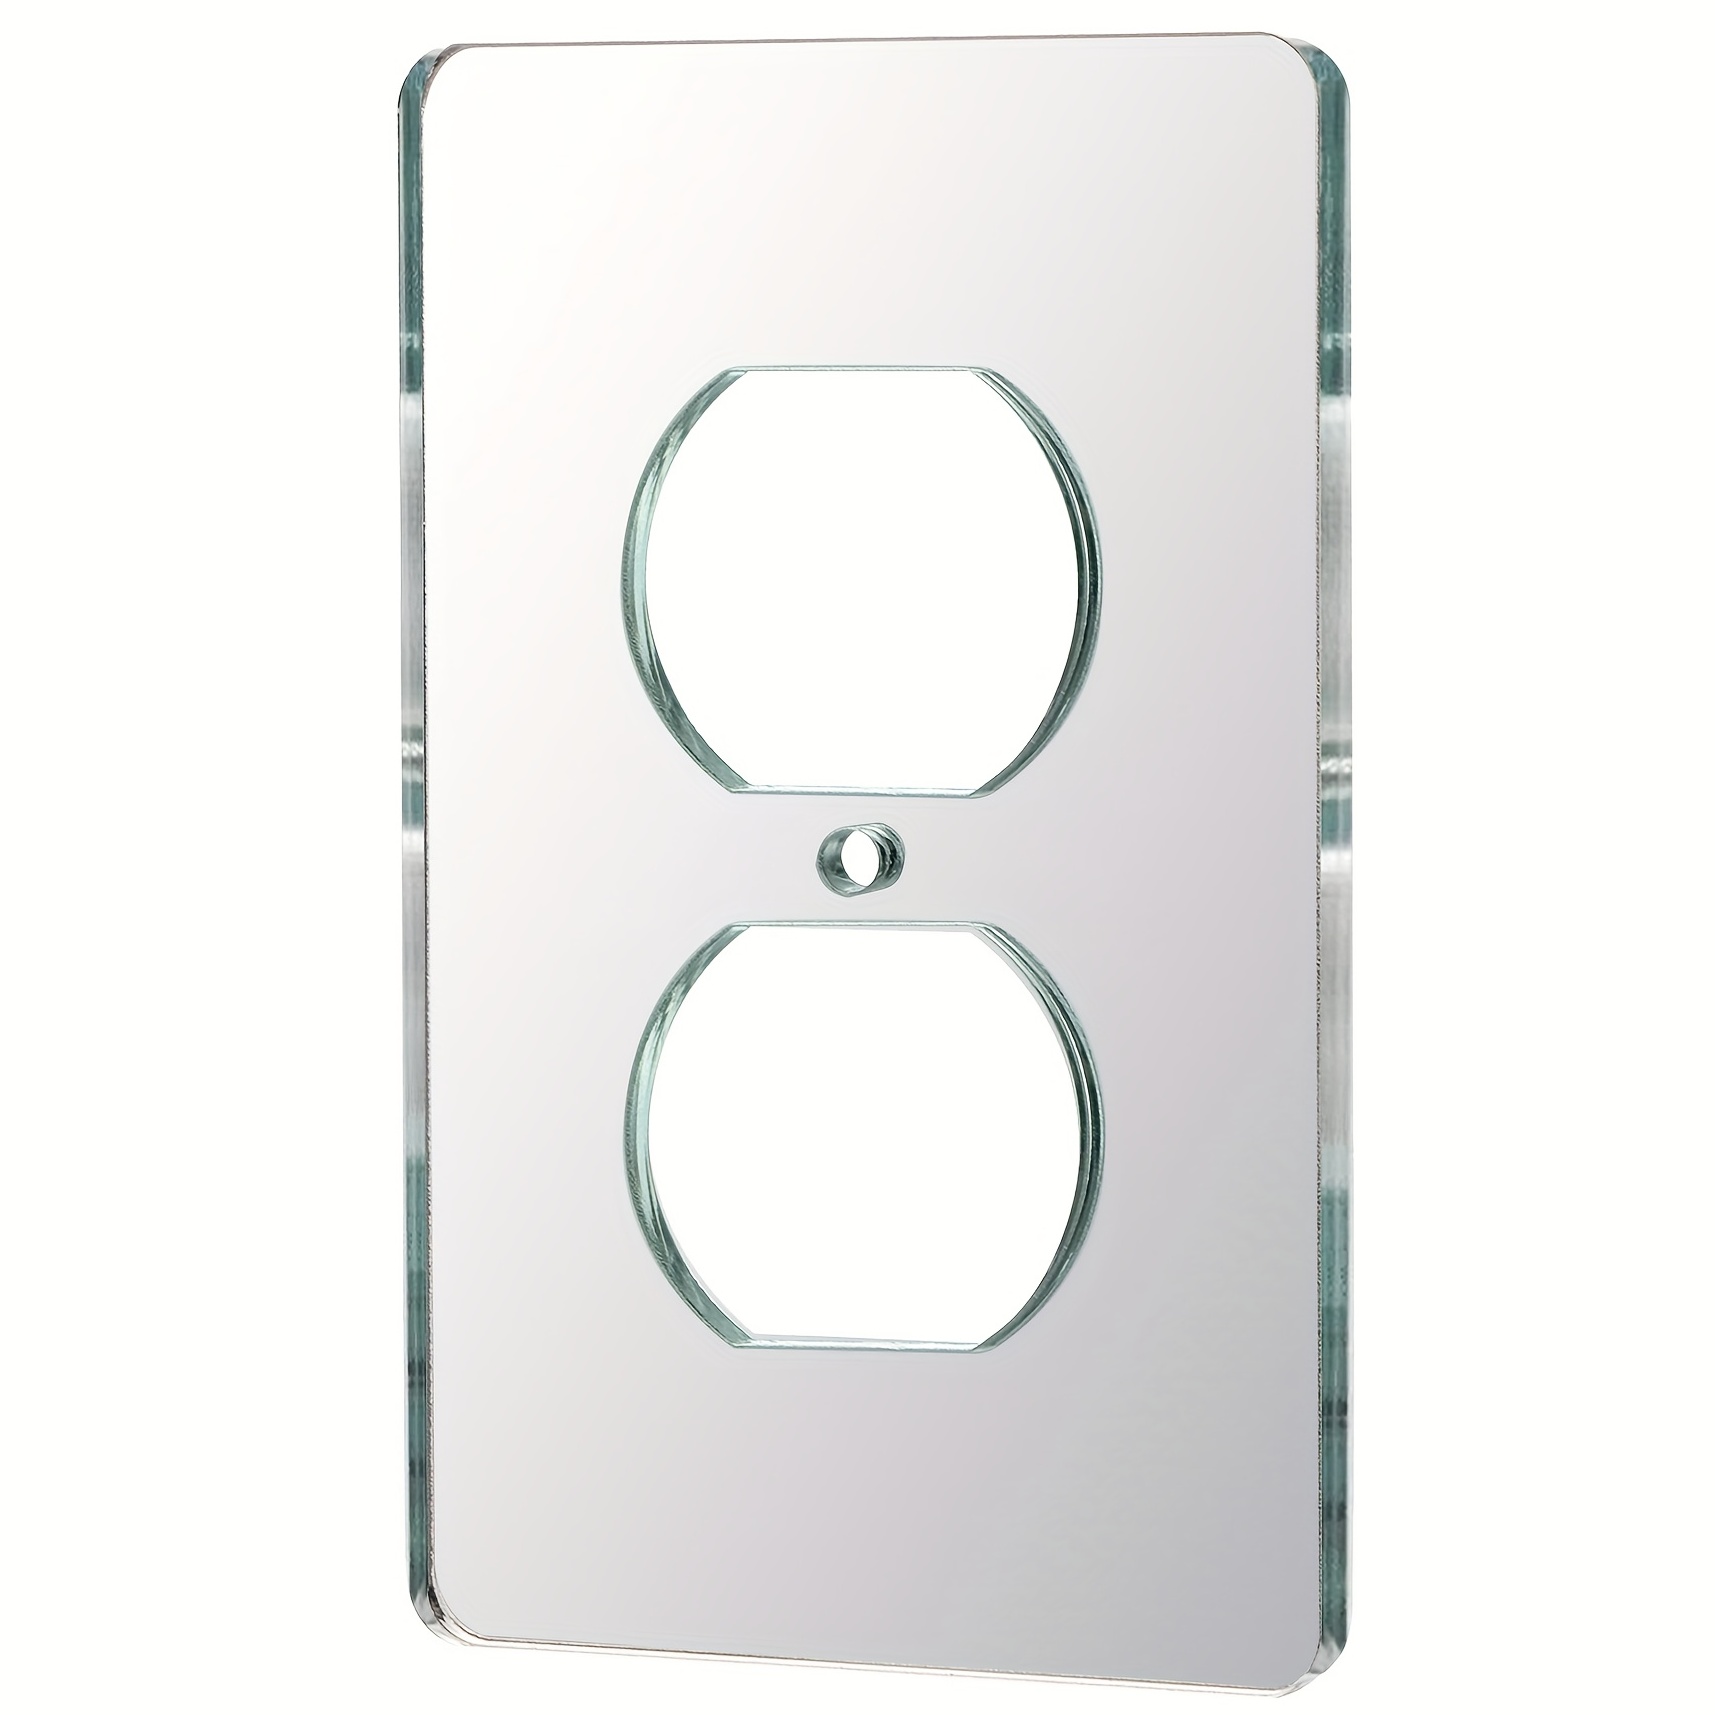 1pc mirror light switch plates single rocker 4 72 x 2 91 switch light cover durable wall plates decorative outlet covers acrylic mirrored light switch cover